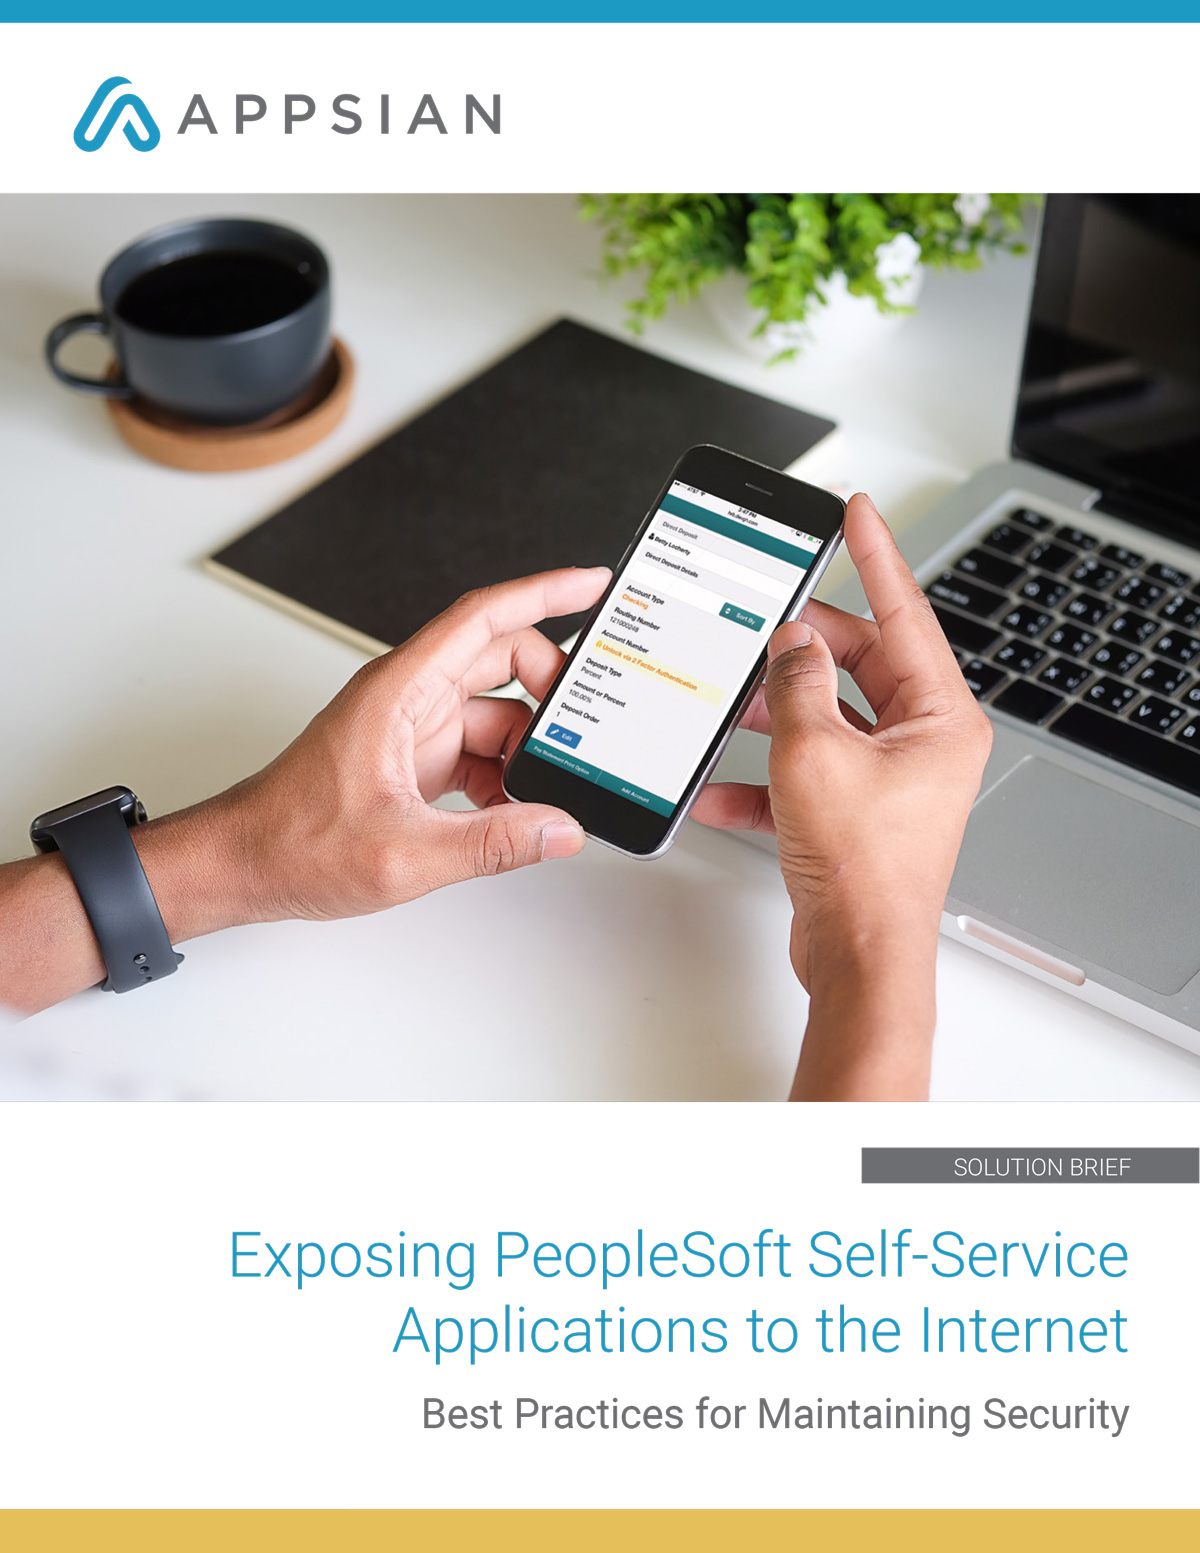 Securely Expand PeopleSoft Self-Service Transactions